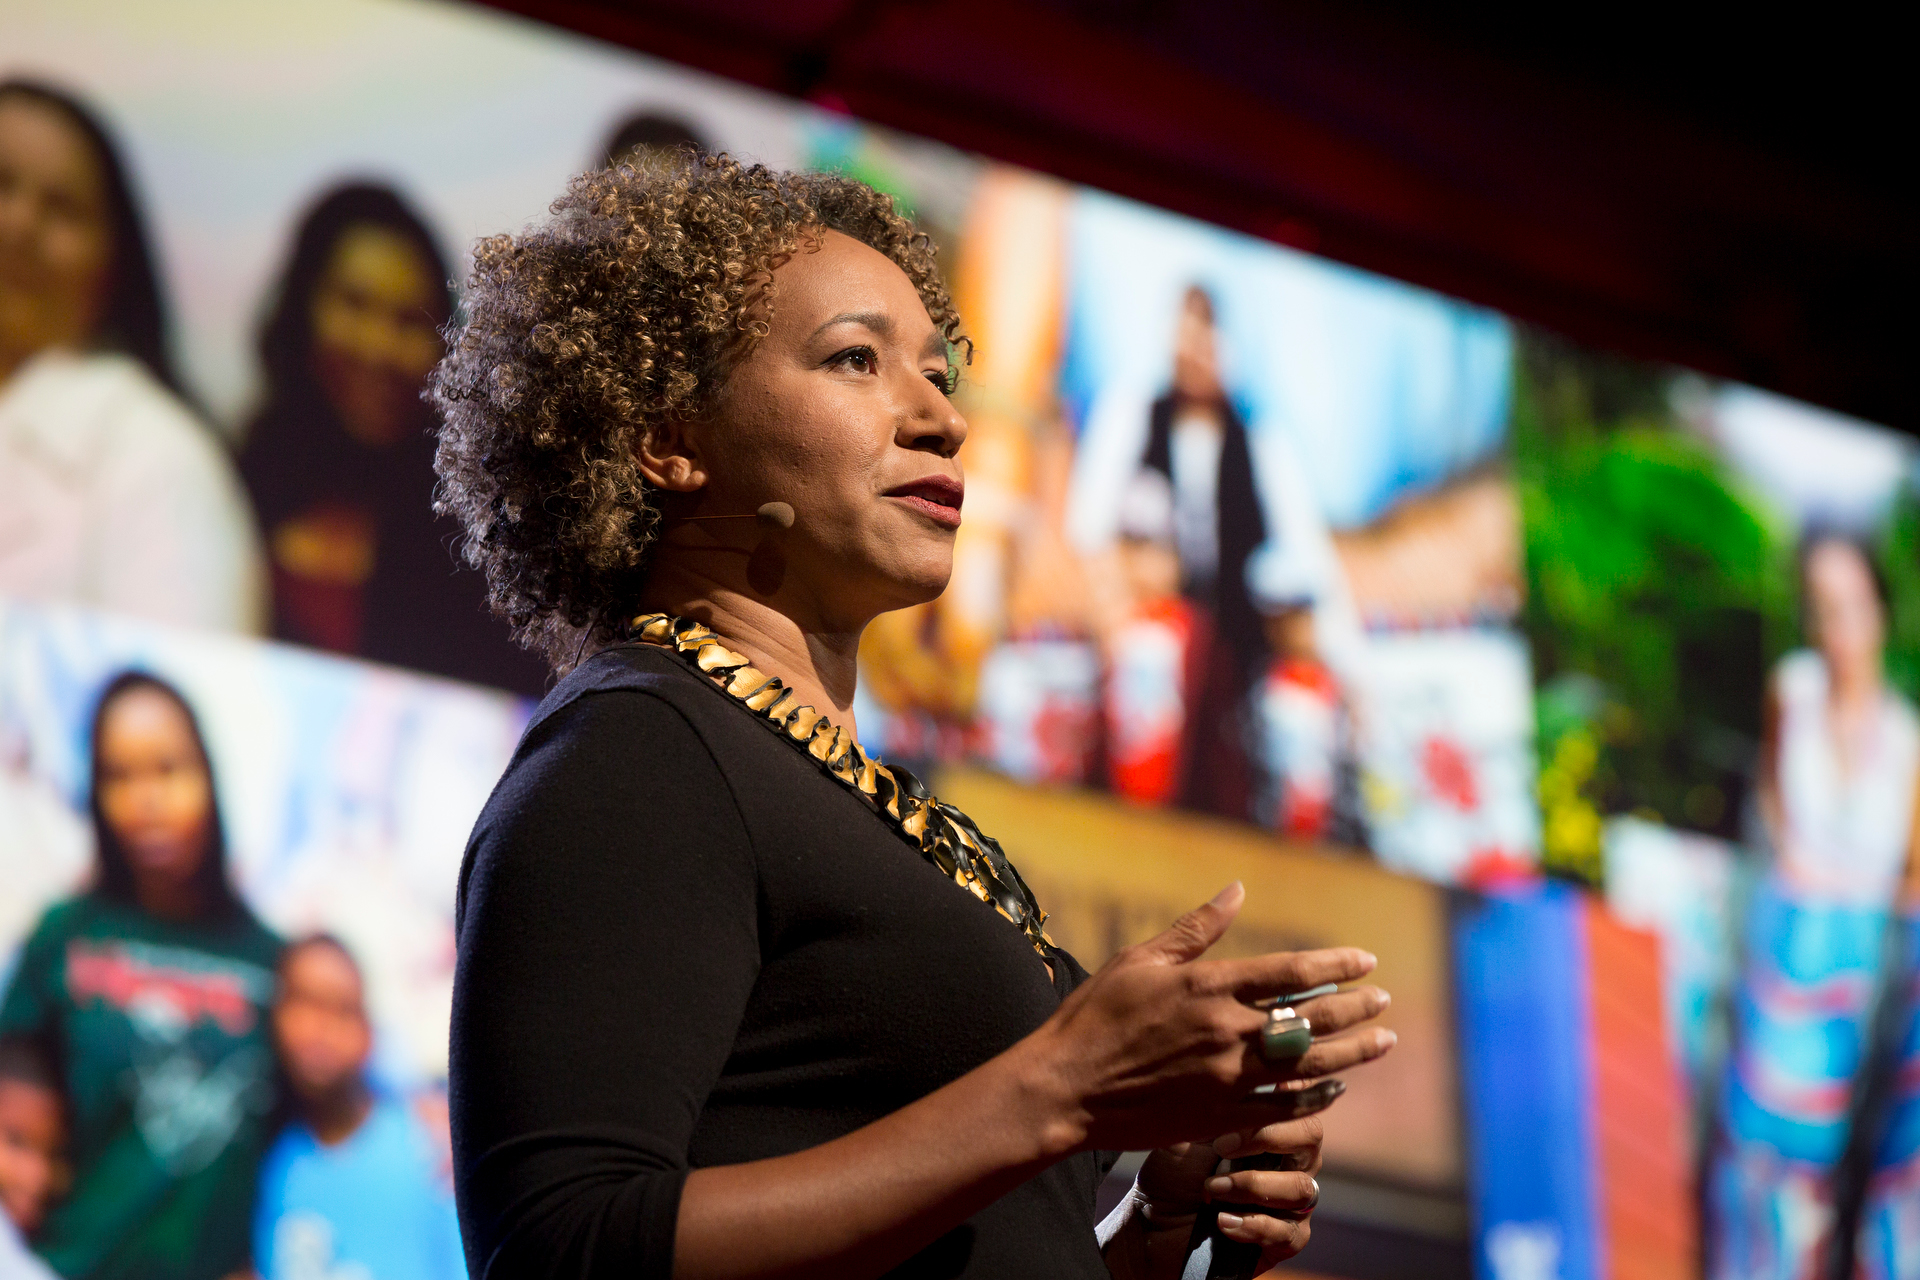 Mia Birdsong speaks at TEDWomen2015 - Momentum, Session 5, May 28, 2015, Monterey Conference Center, Monterey, California, USA. Photo: Marla Aufmuth/TED